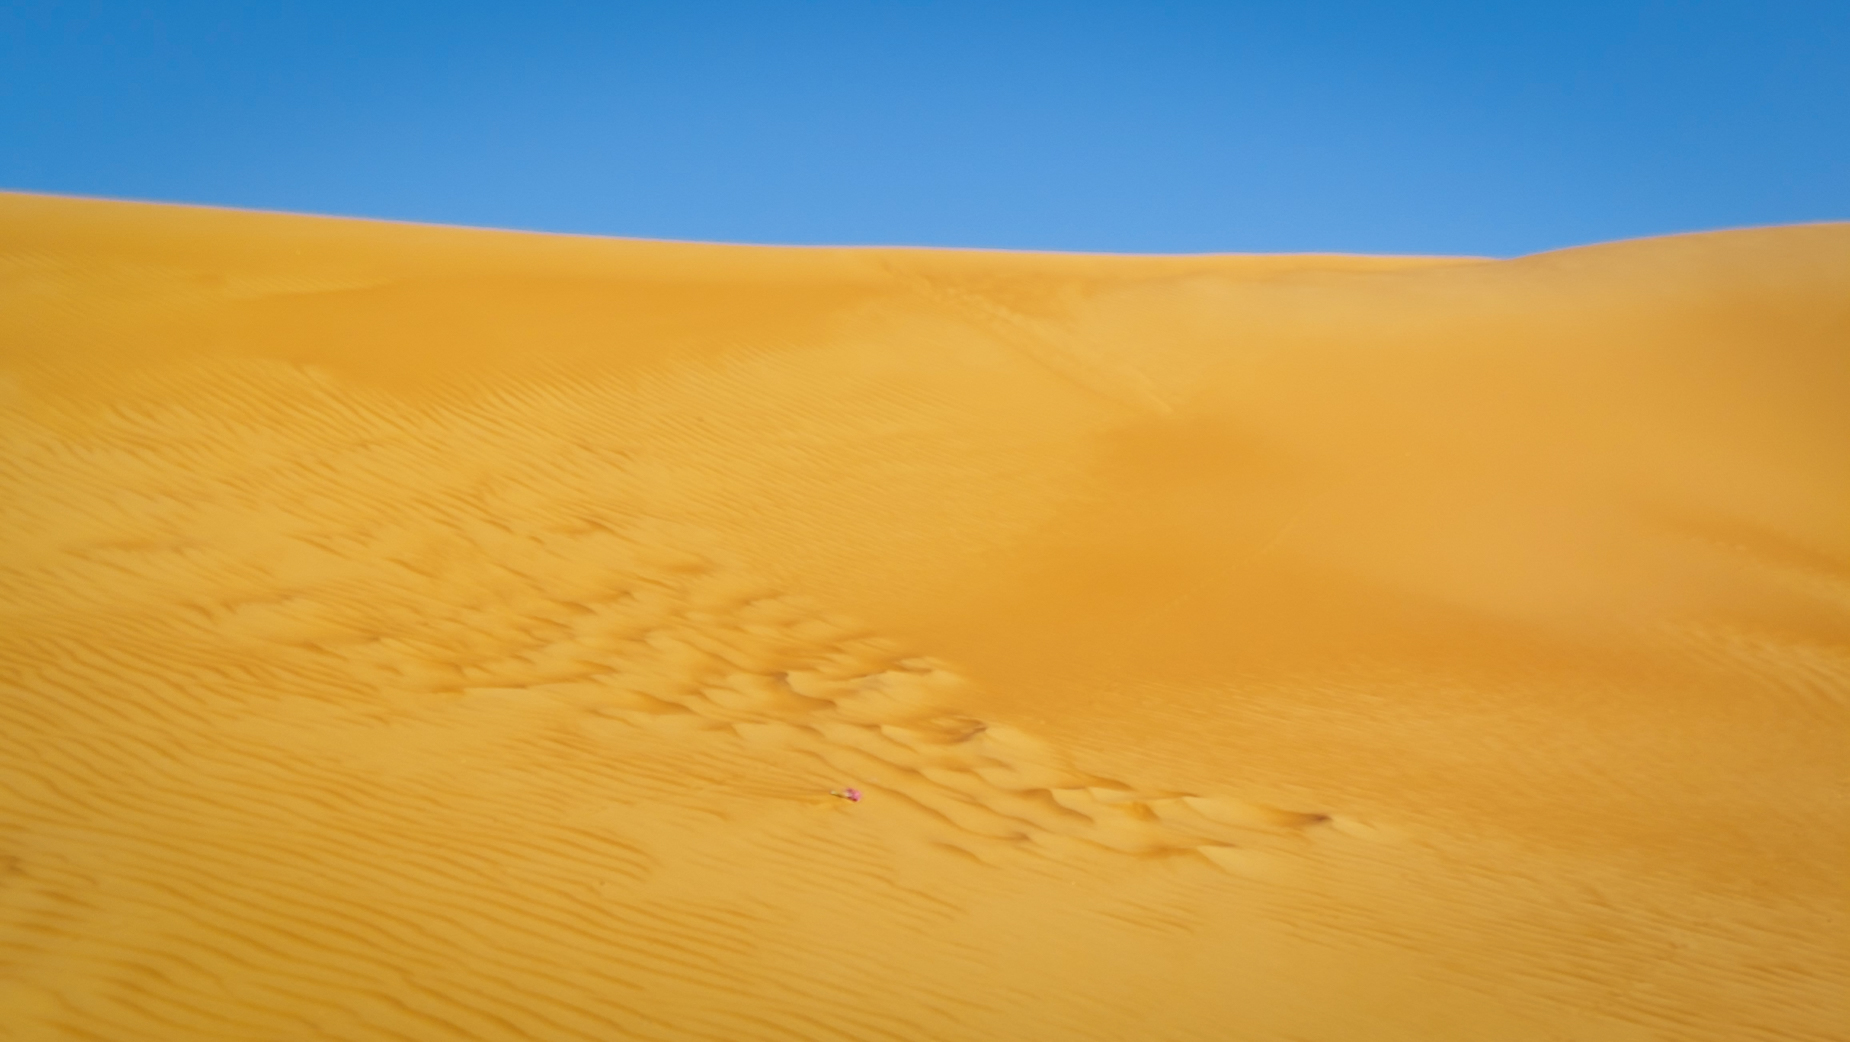 <span  class="uc_style_uc_tiles_grid_image_elementor_uc_items_attribute_title" style="color:#ffffff;">Omani desert: Wahiba Sands (there we have to go!)</span>